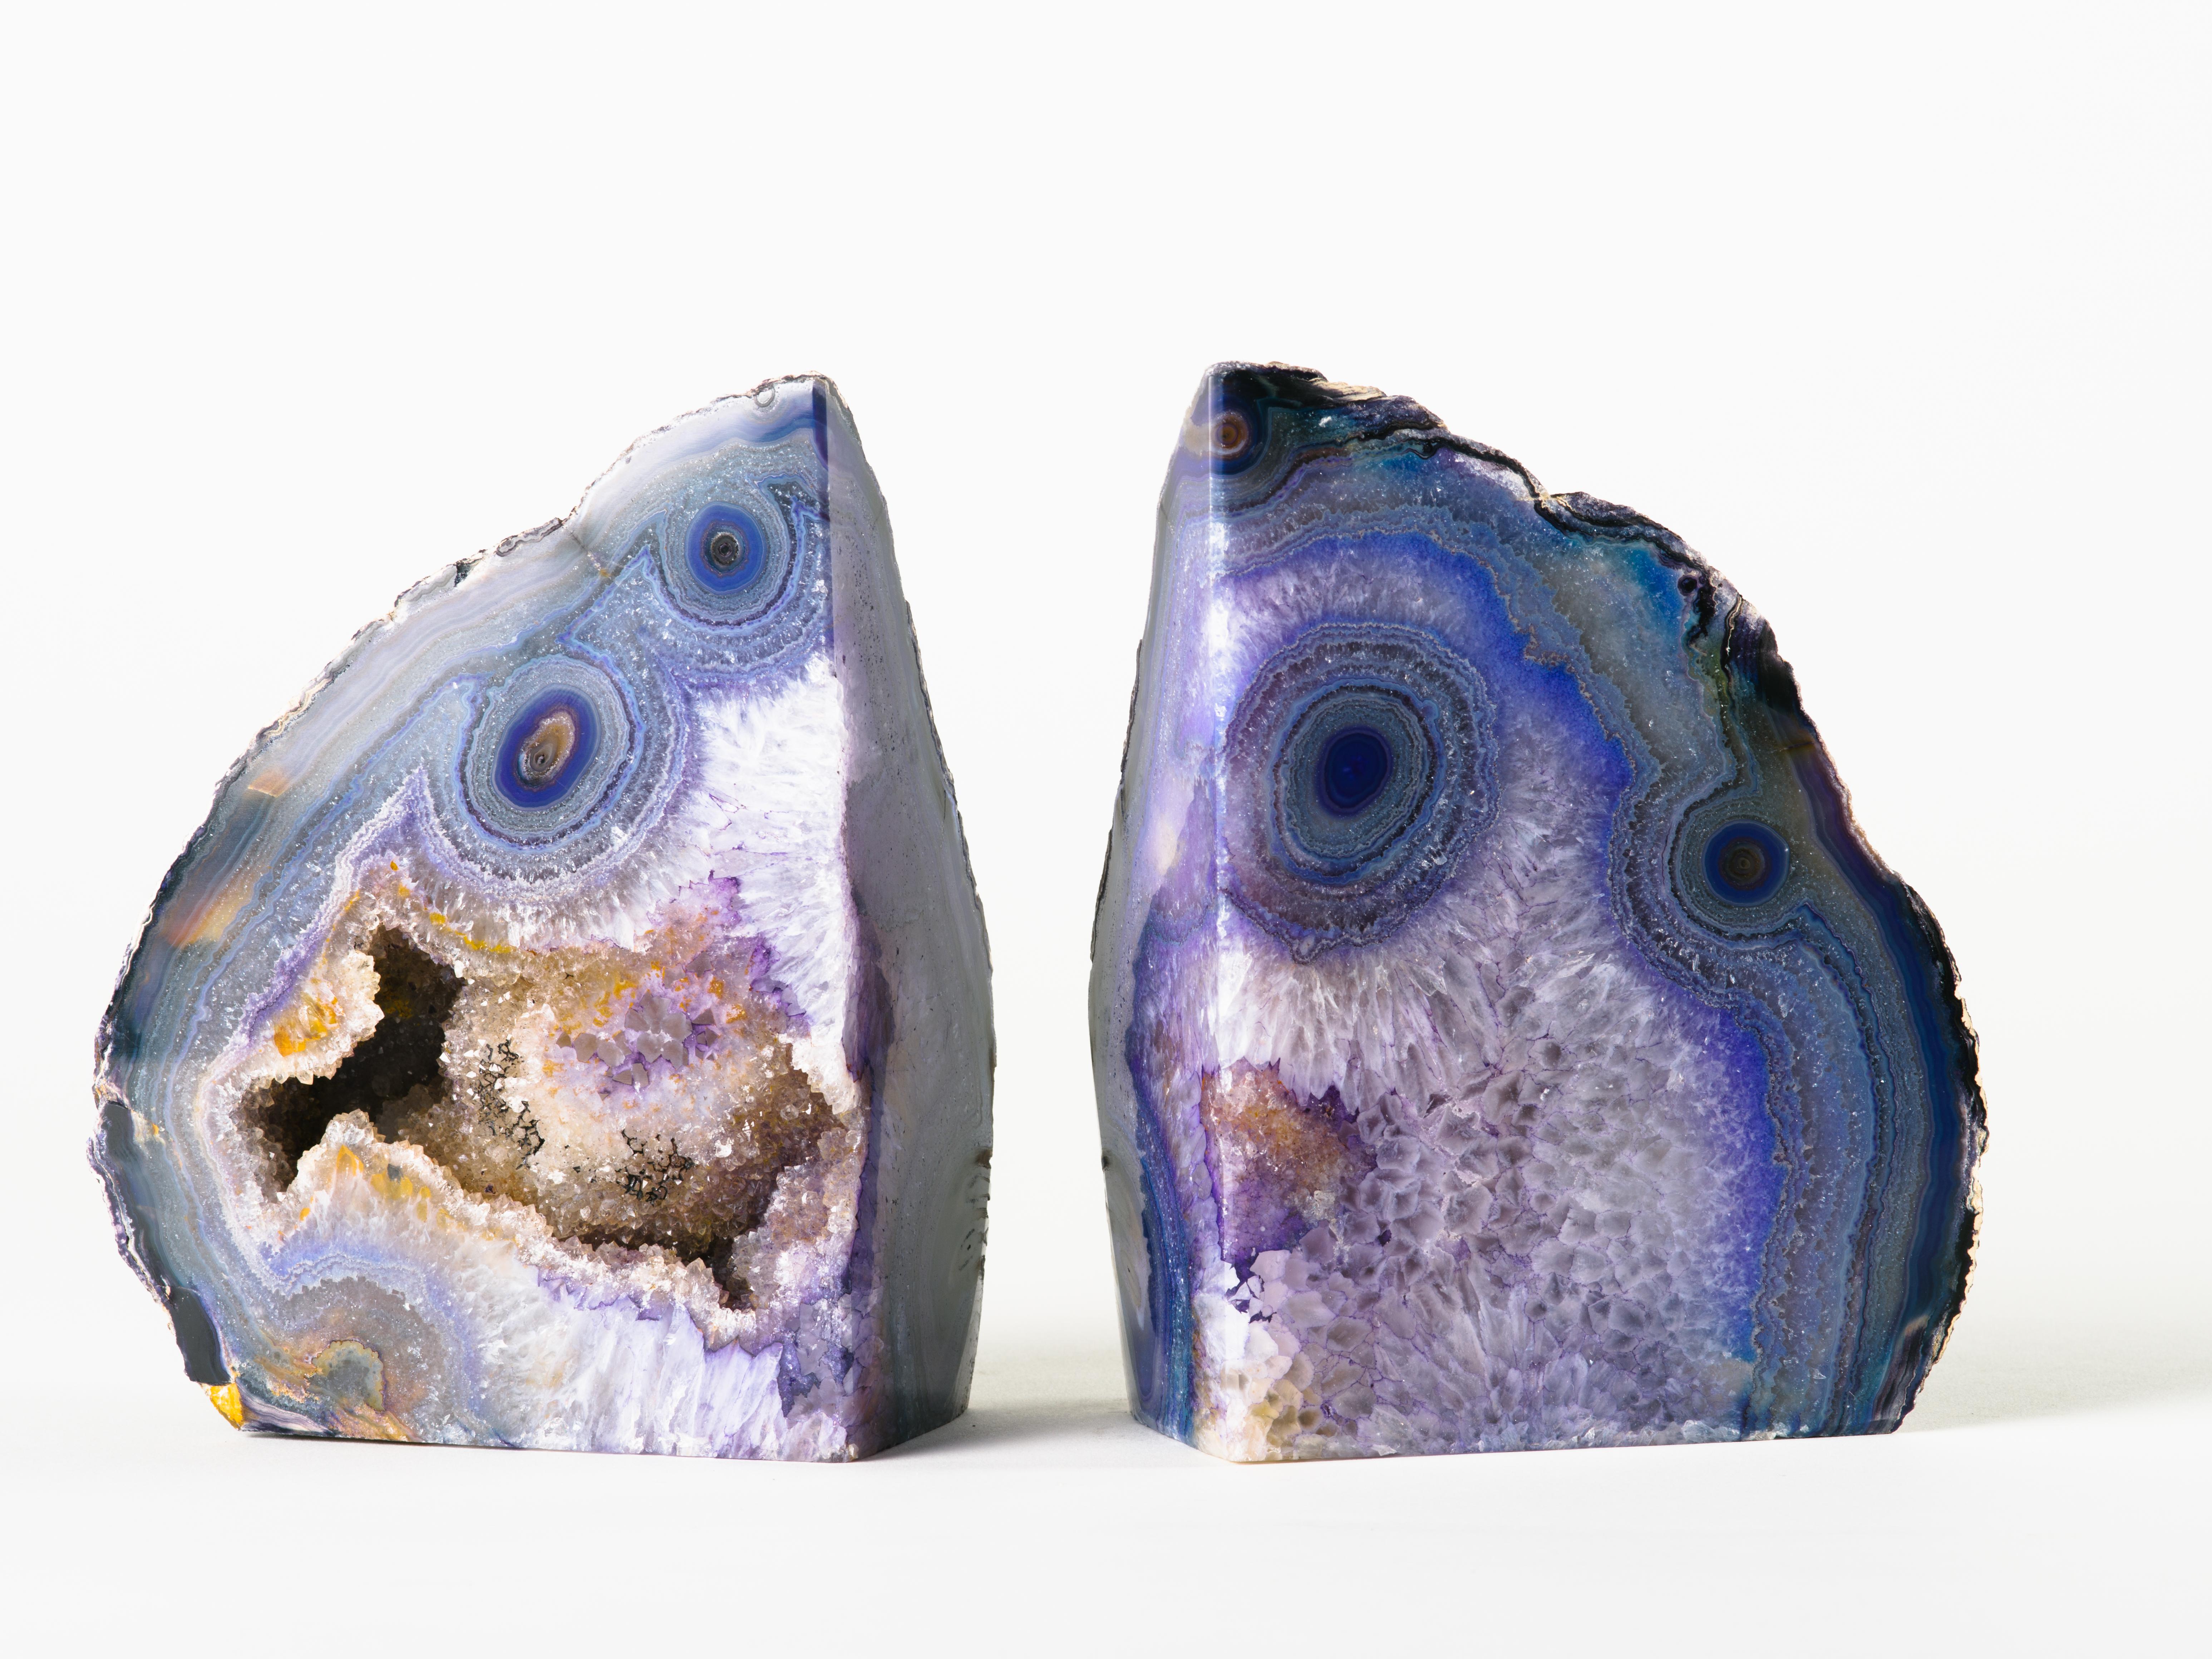 Pair of organic modern quartz crystal bookends in stunning hues of purple. Bookends feature Fine crystalline centres in varying hues of grey and amber. Features unusual circular patterns and variations of purple knots, reminiscent of wood. Bookends